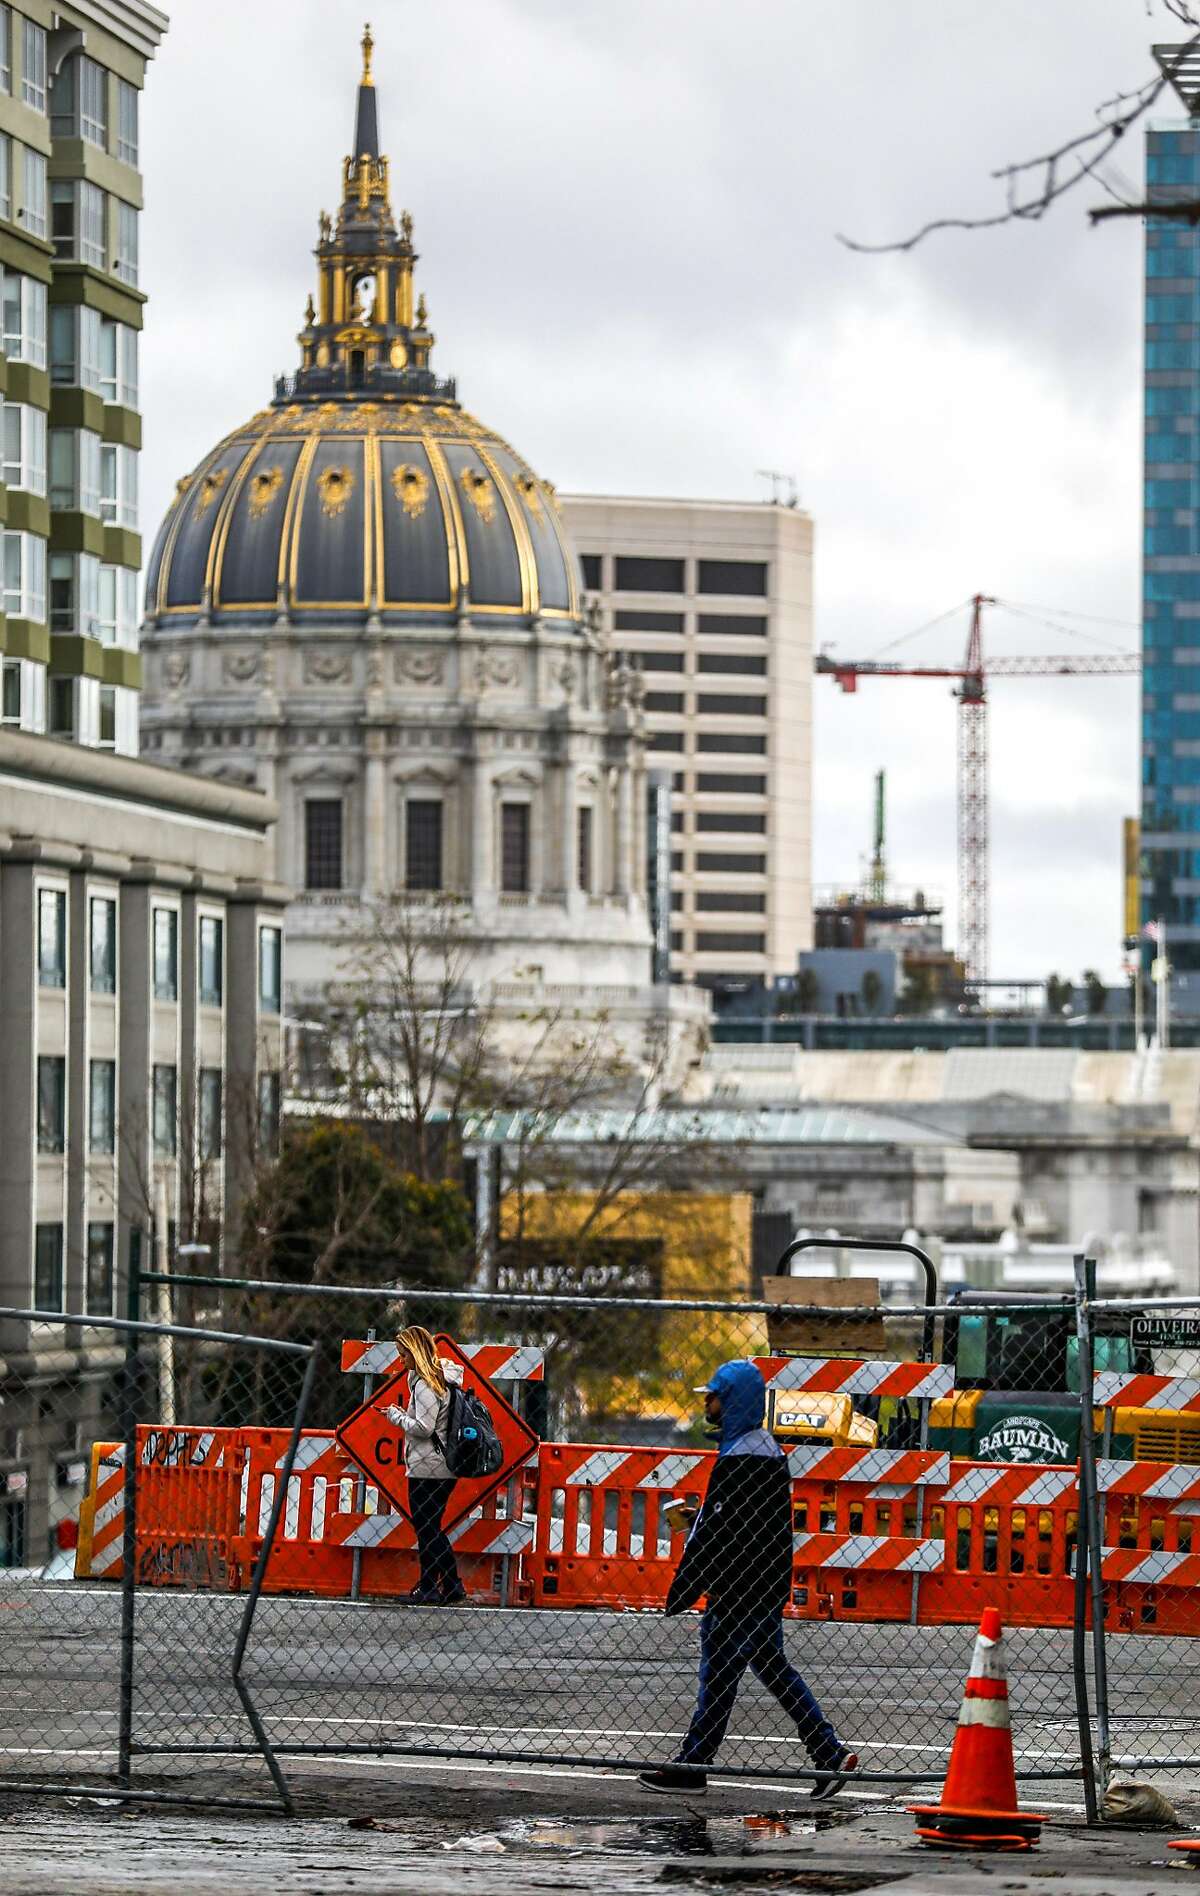 People pass by construction on Van Ness Avenue in San Francisco, California, on Wednesday, March 6, 2019.